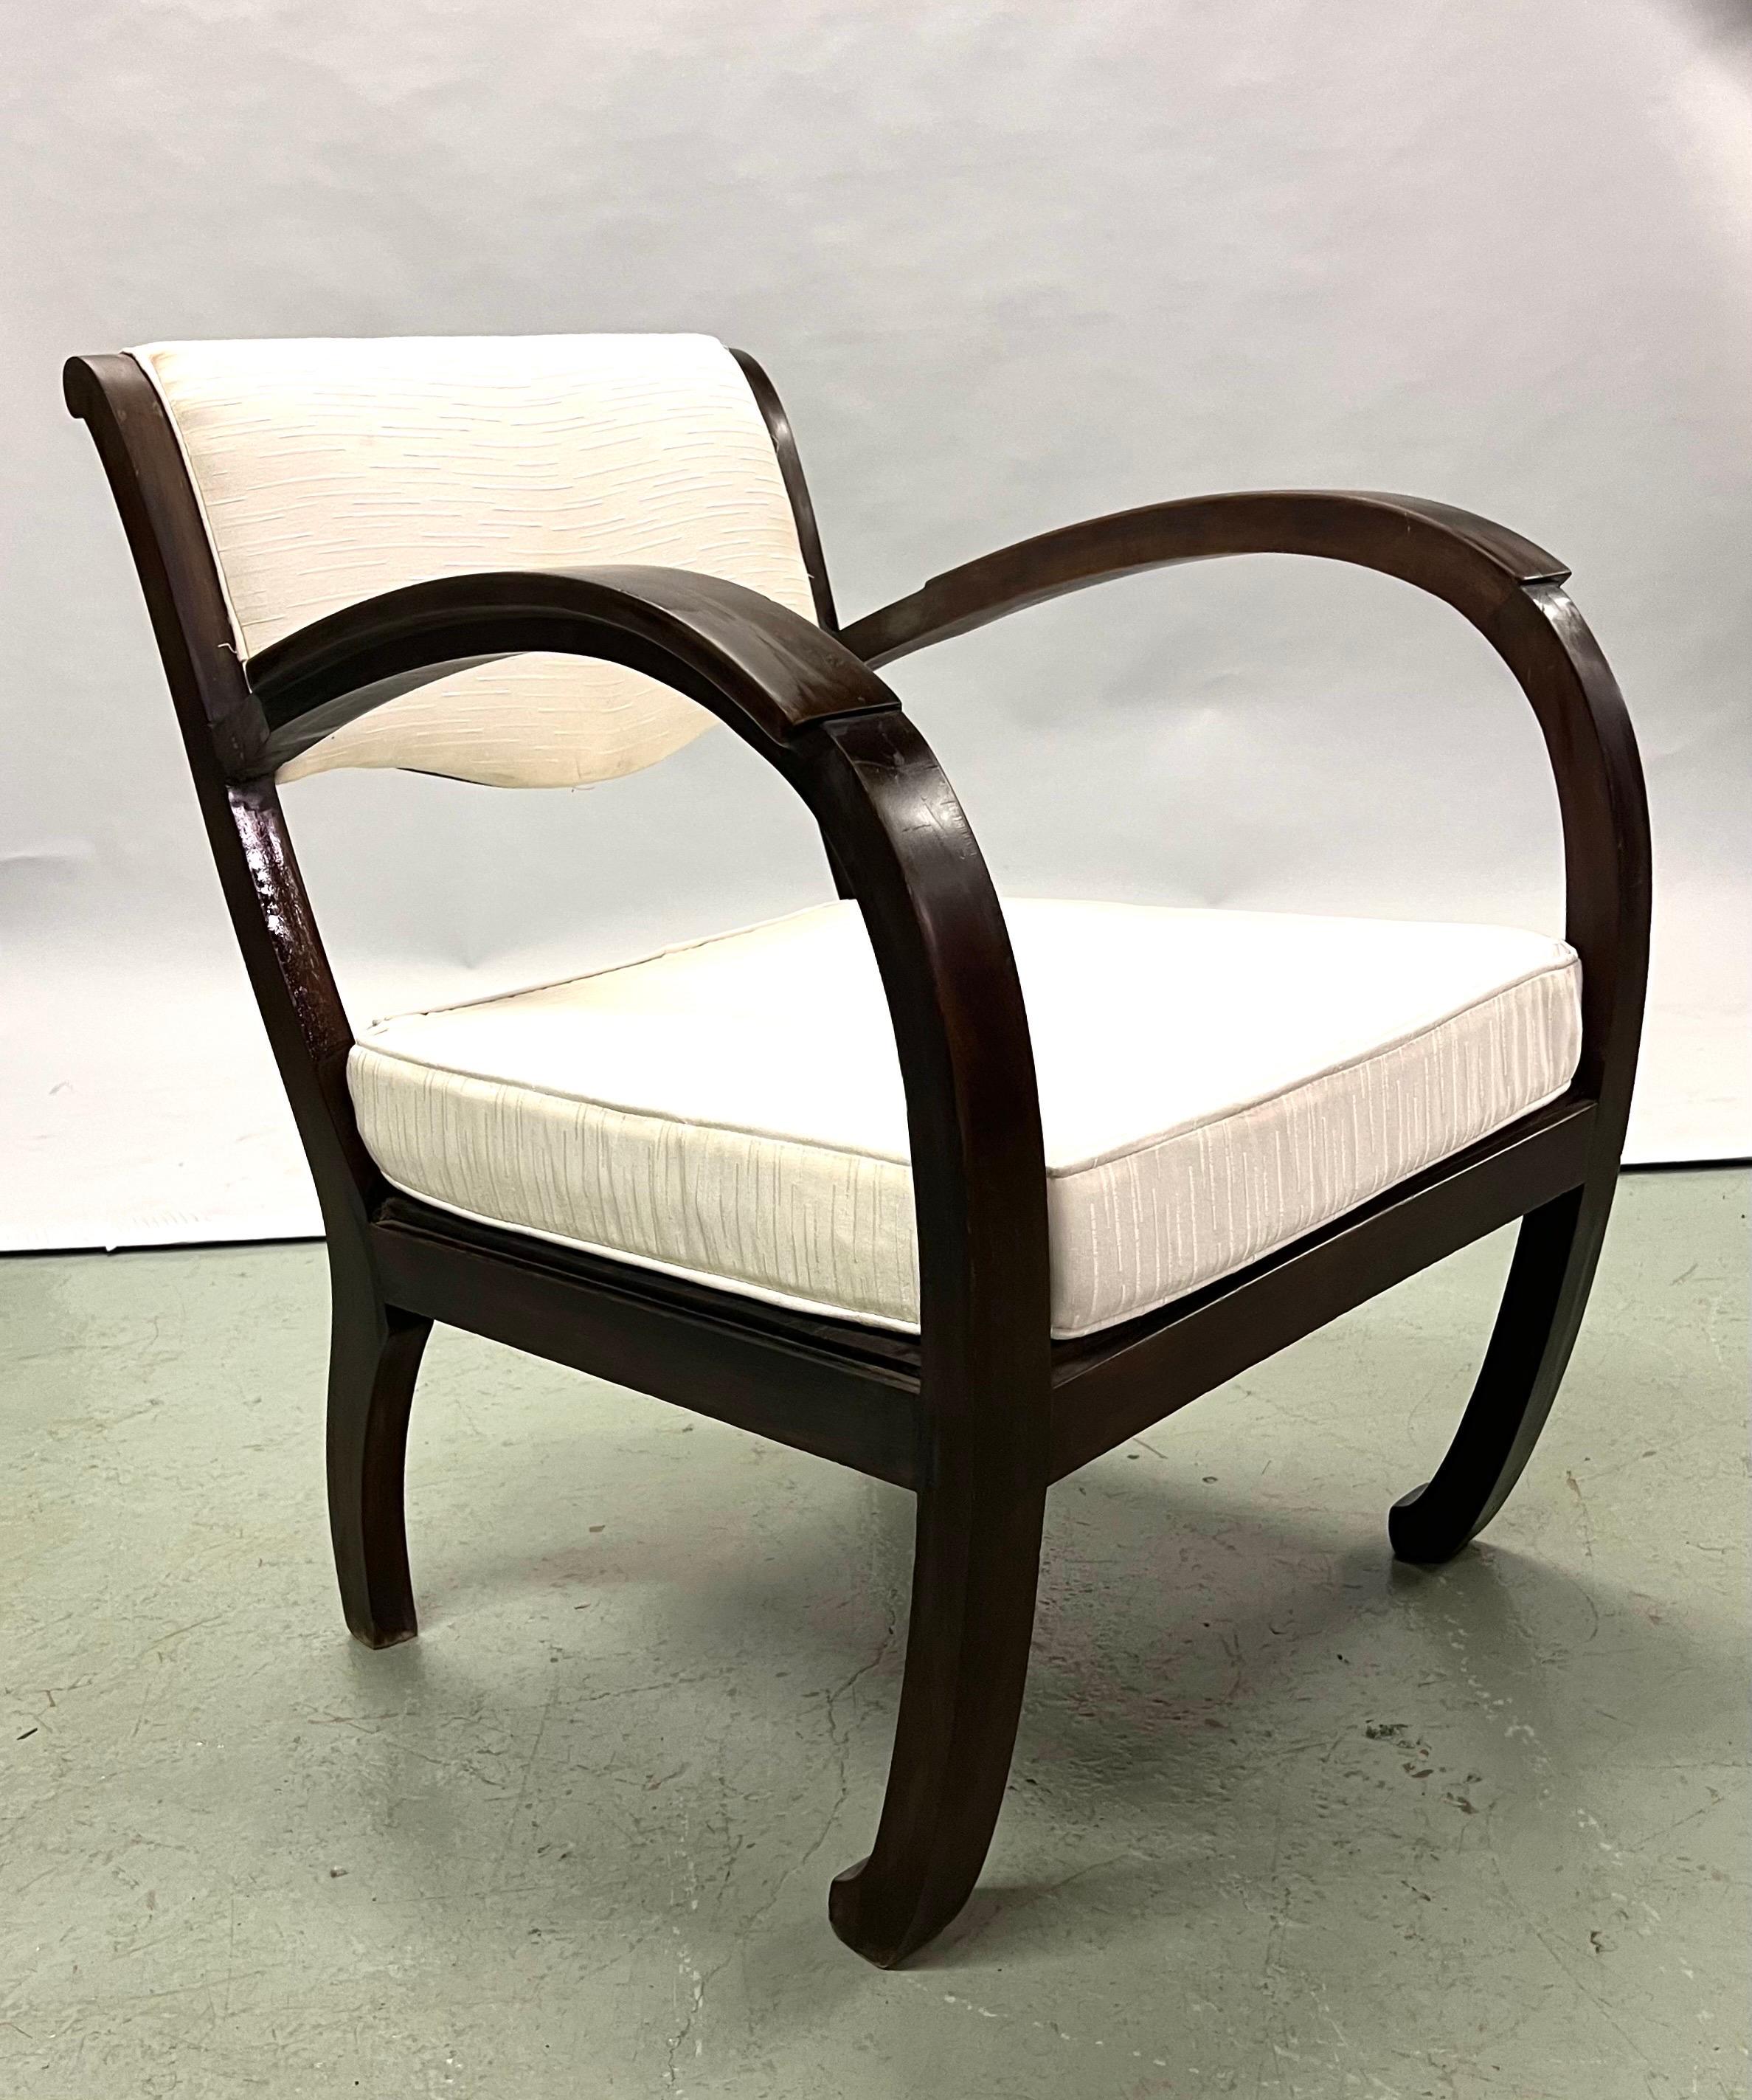 Rare French Art Deco Hand Carved Teak Armchairs/ Lounge Chairs, 1920-30 For Sale 2